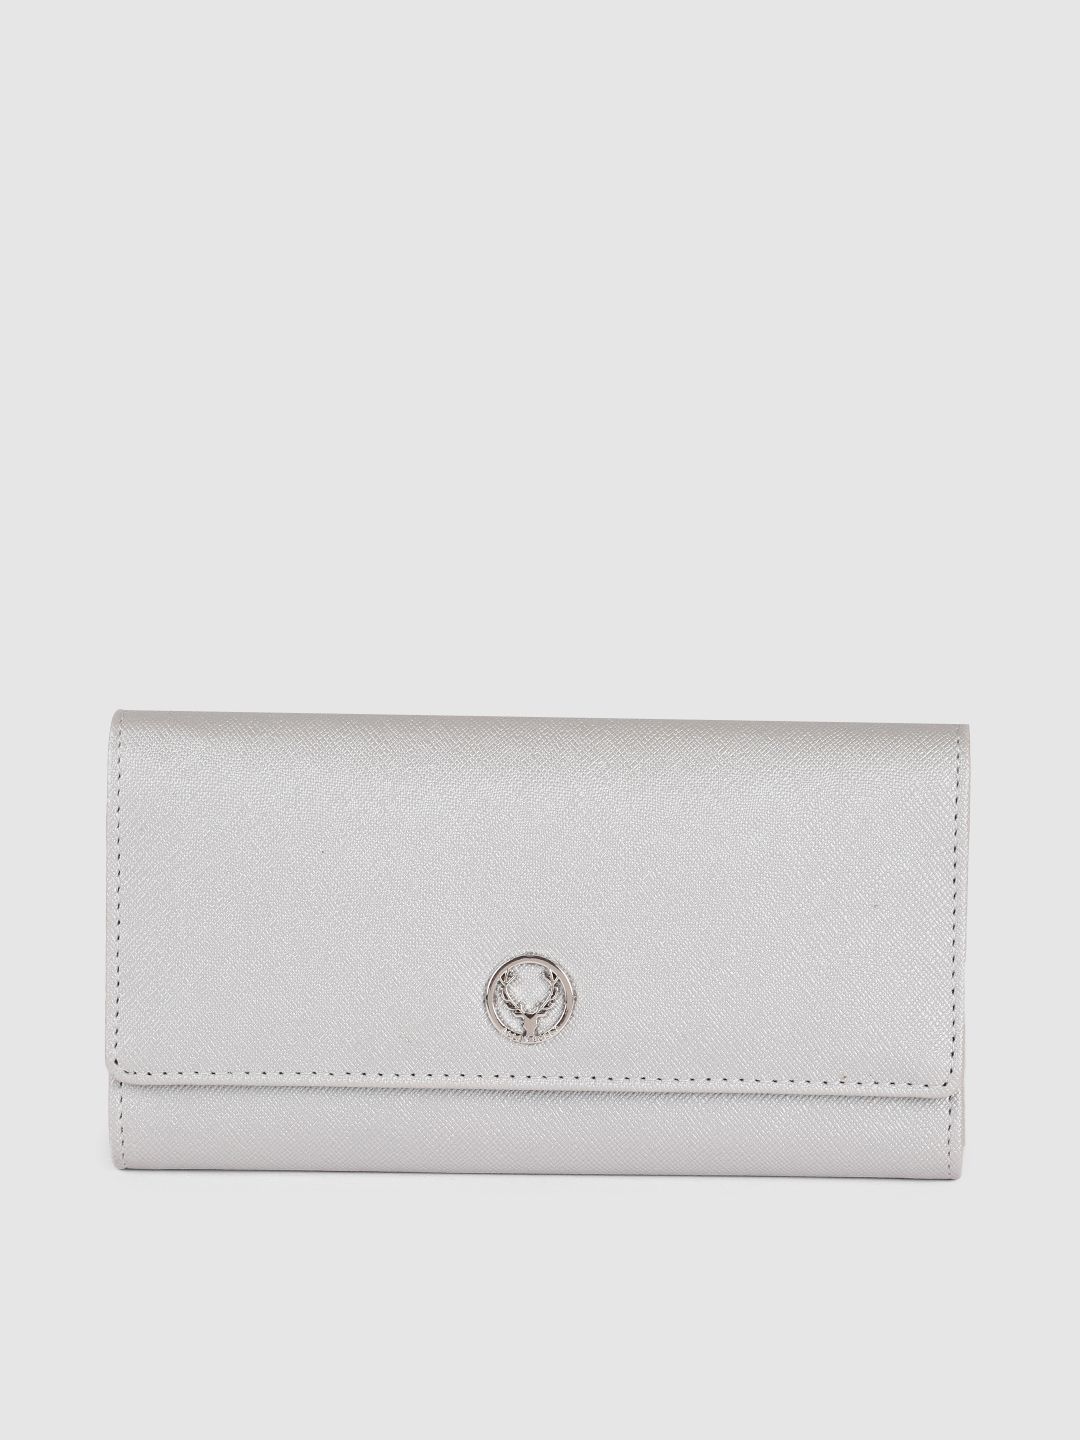 Allen Solly Women Silver-Toned Two Fold Wallet Price in India